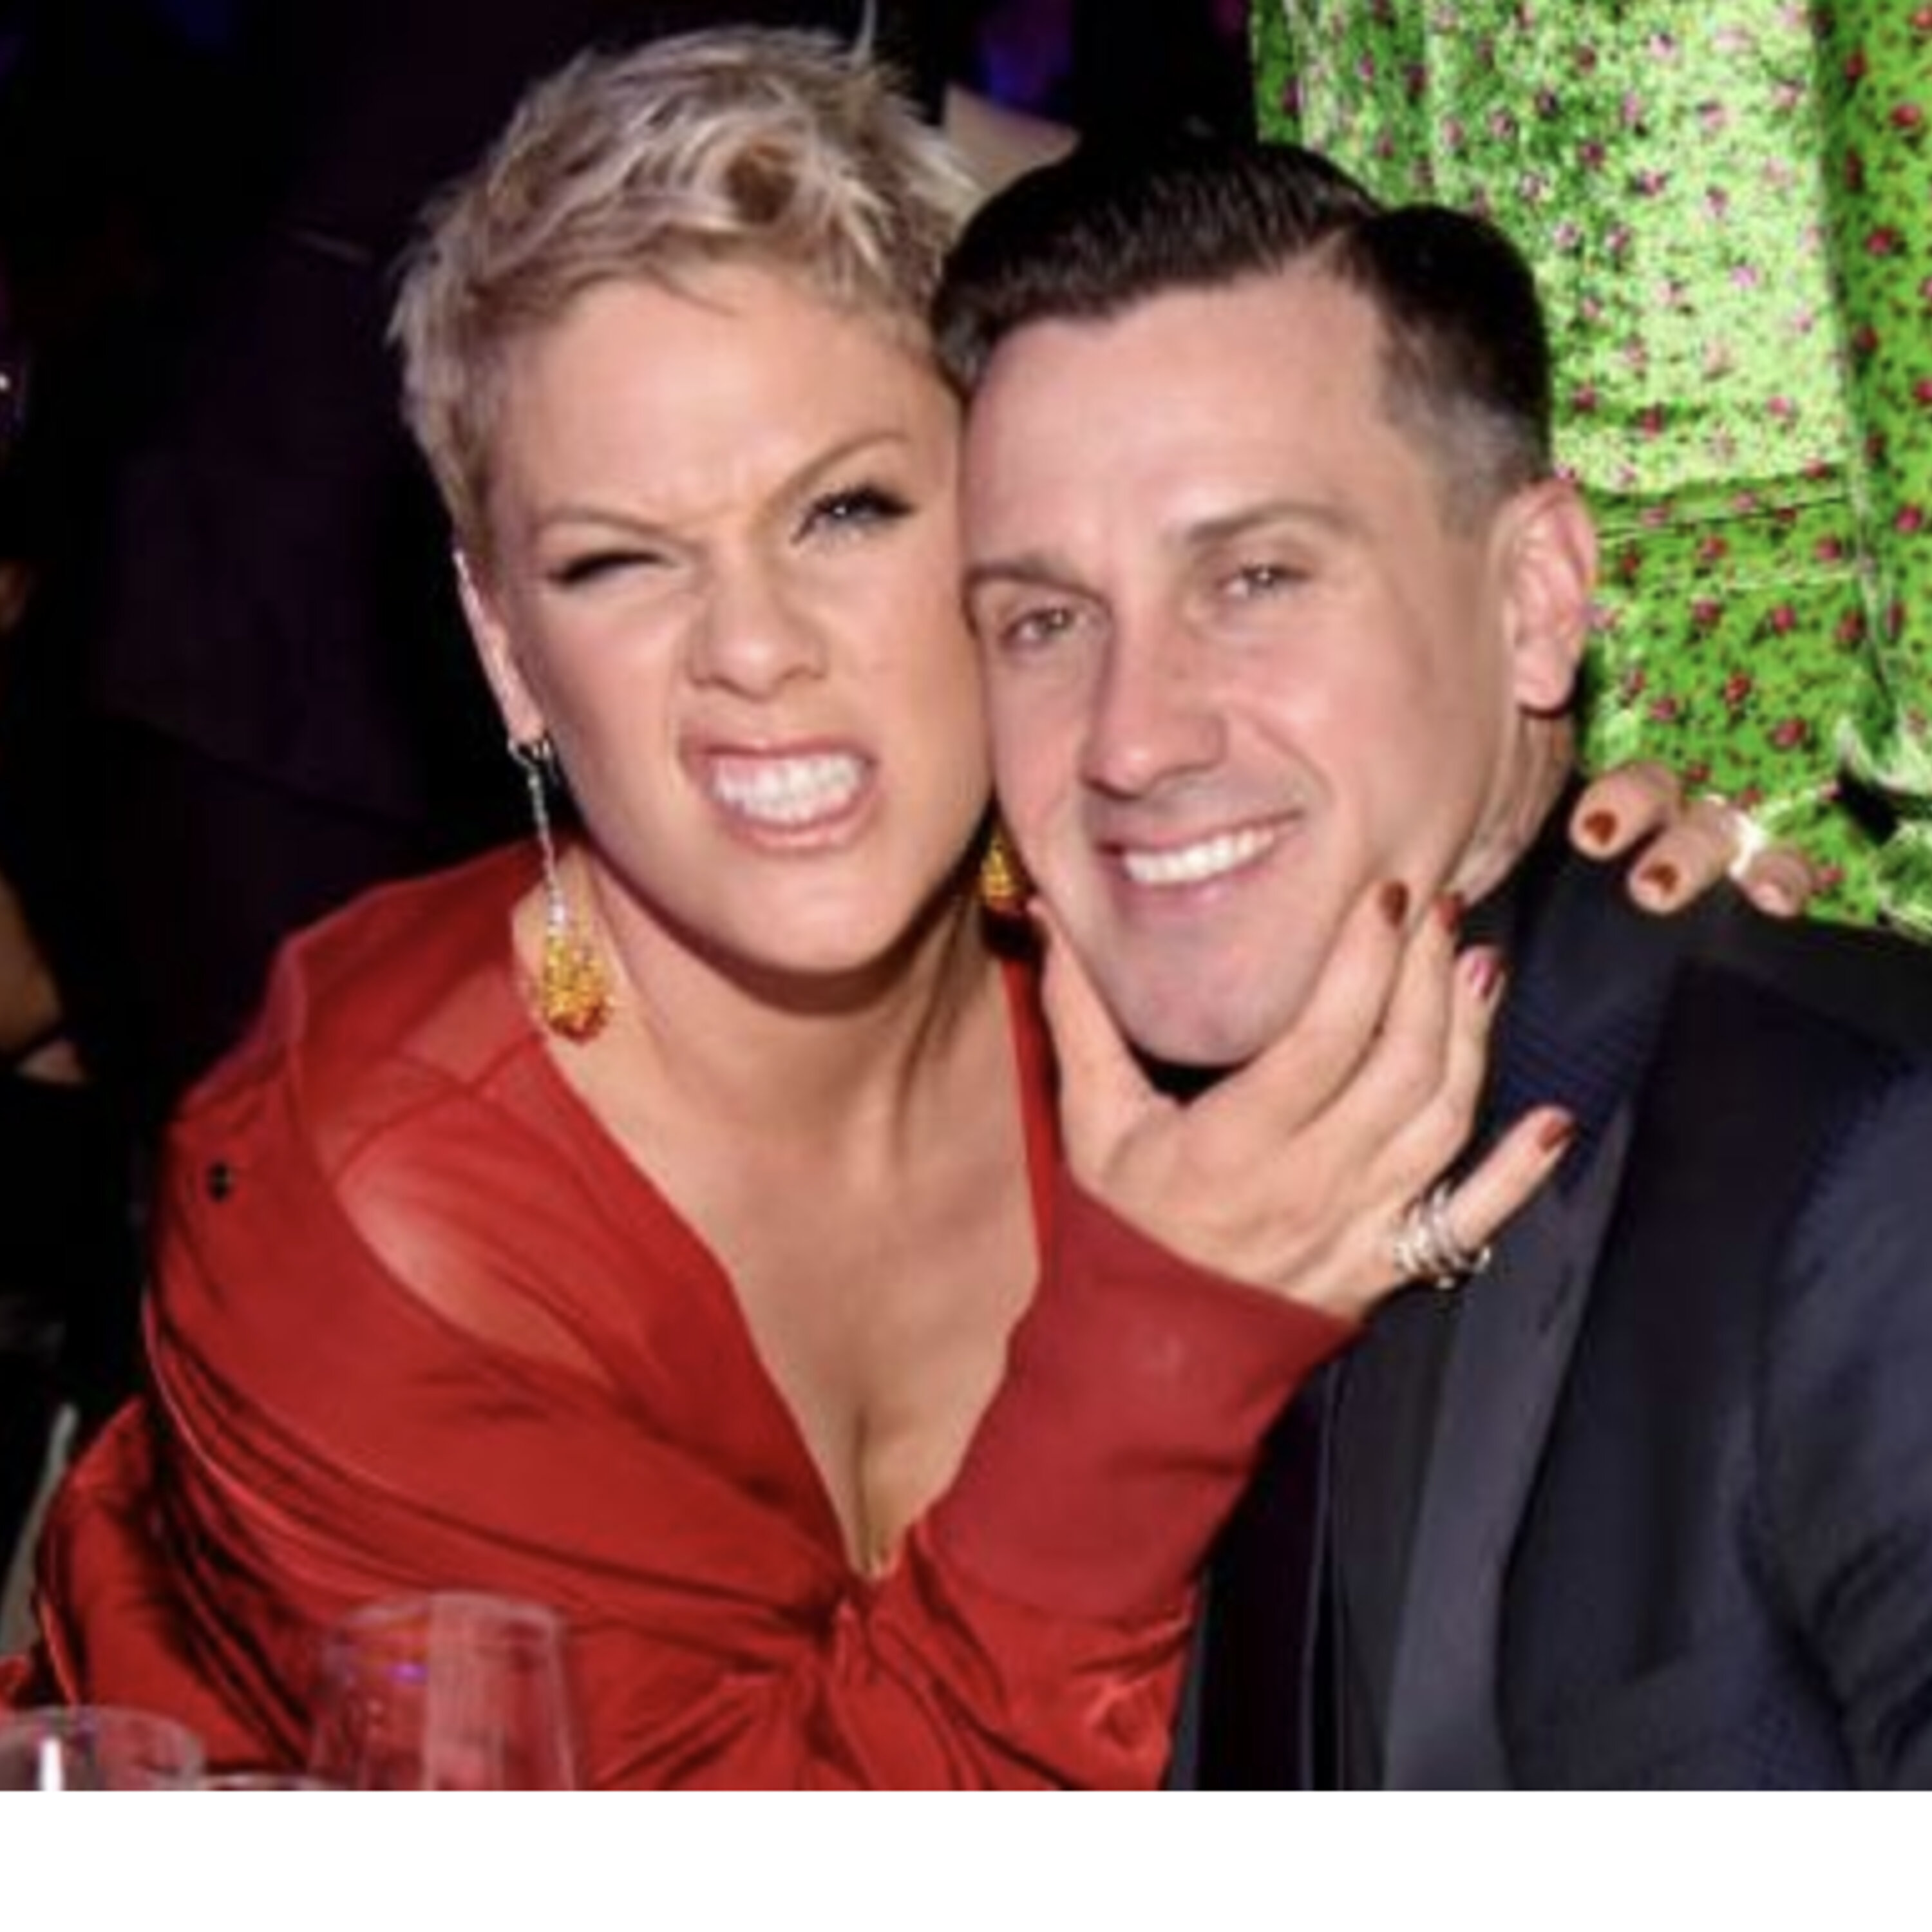 Pink's Husband Posts Emotional Birthday Tribute To His Wife #COUPLEGOALS